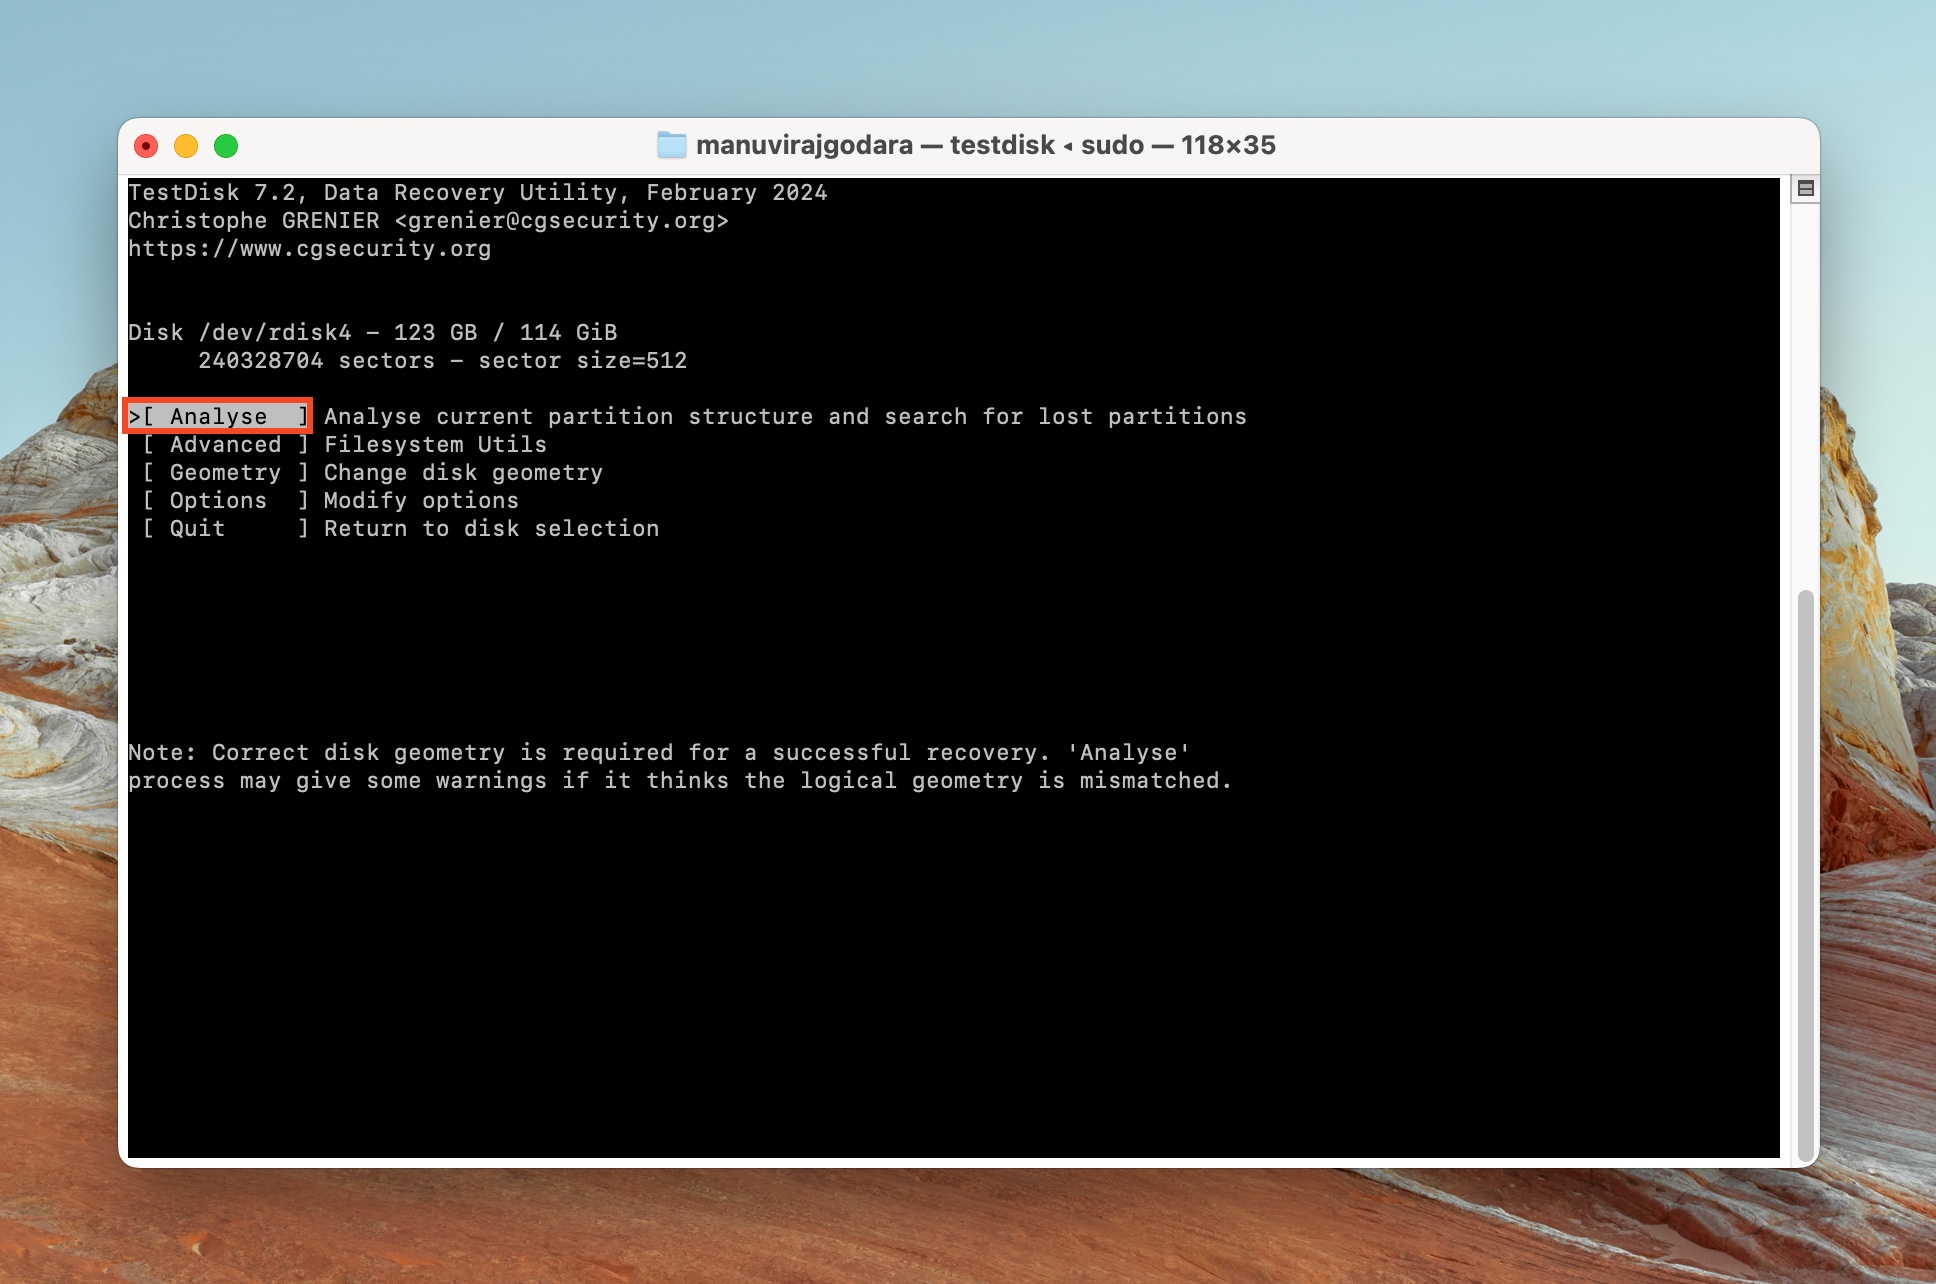 TestDisk command interface showing 'Analyse' option selected to analyze current partition structure.